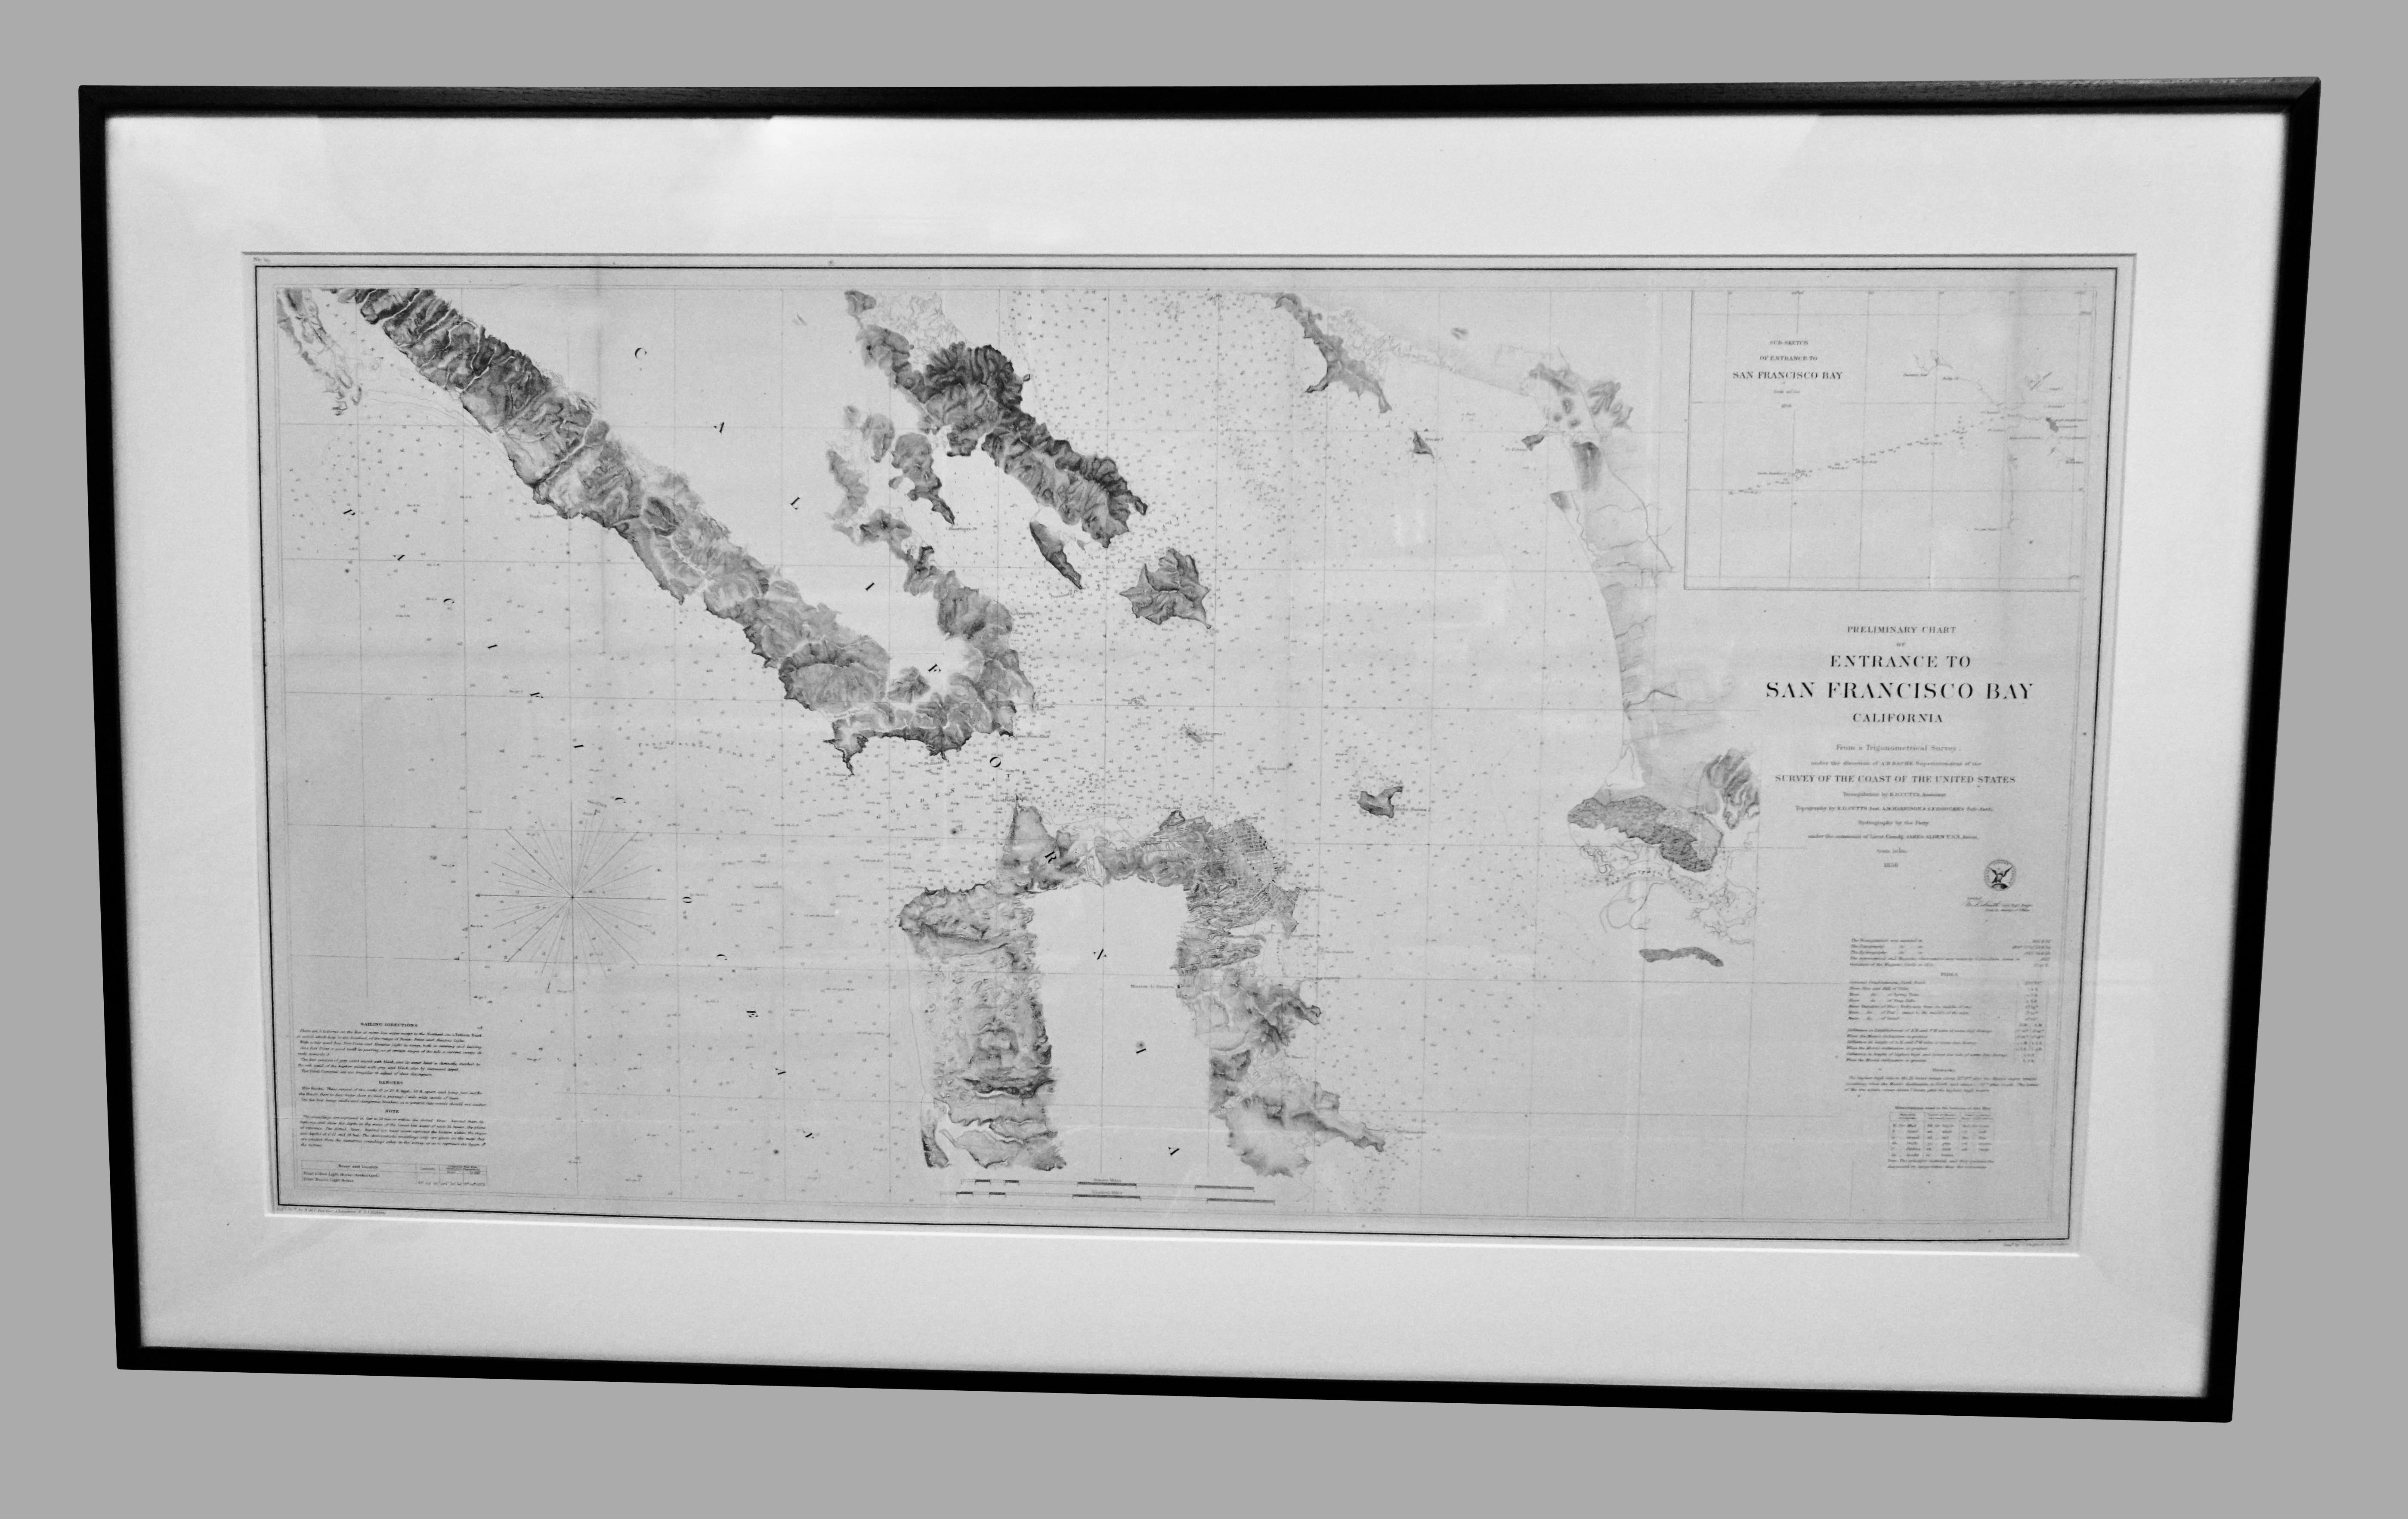 A fine example of the 1856 U.S. Coast lithographic survey nautical chart of the entrance to San Francisco bay and the city. Published in 1856 by the Office of the Coast Survey the official chart maker of the United States.
An interesting and